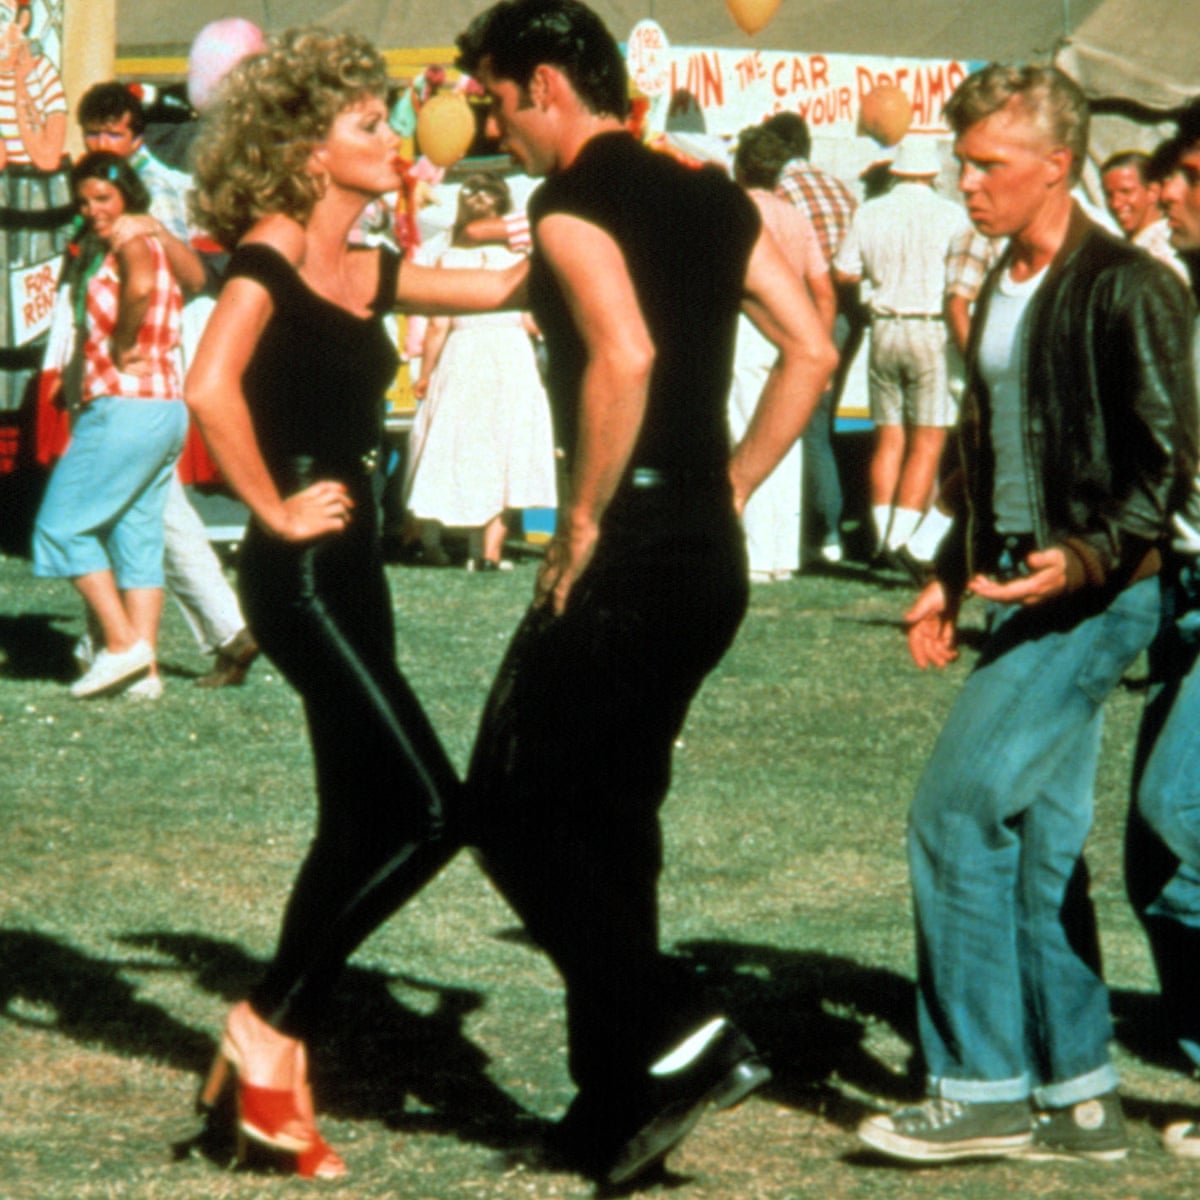 They're the pants that I want: buyer pays $405,700 for Olivia Newton-John's Grease  outfit at auction | Grease | The Guardian